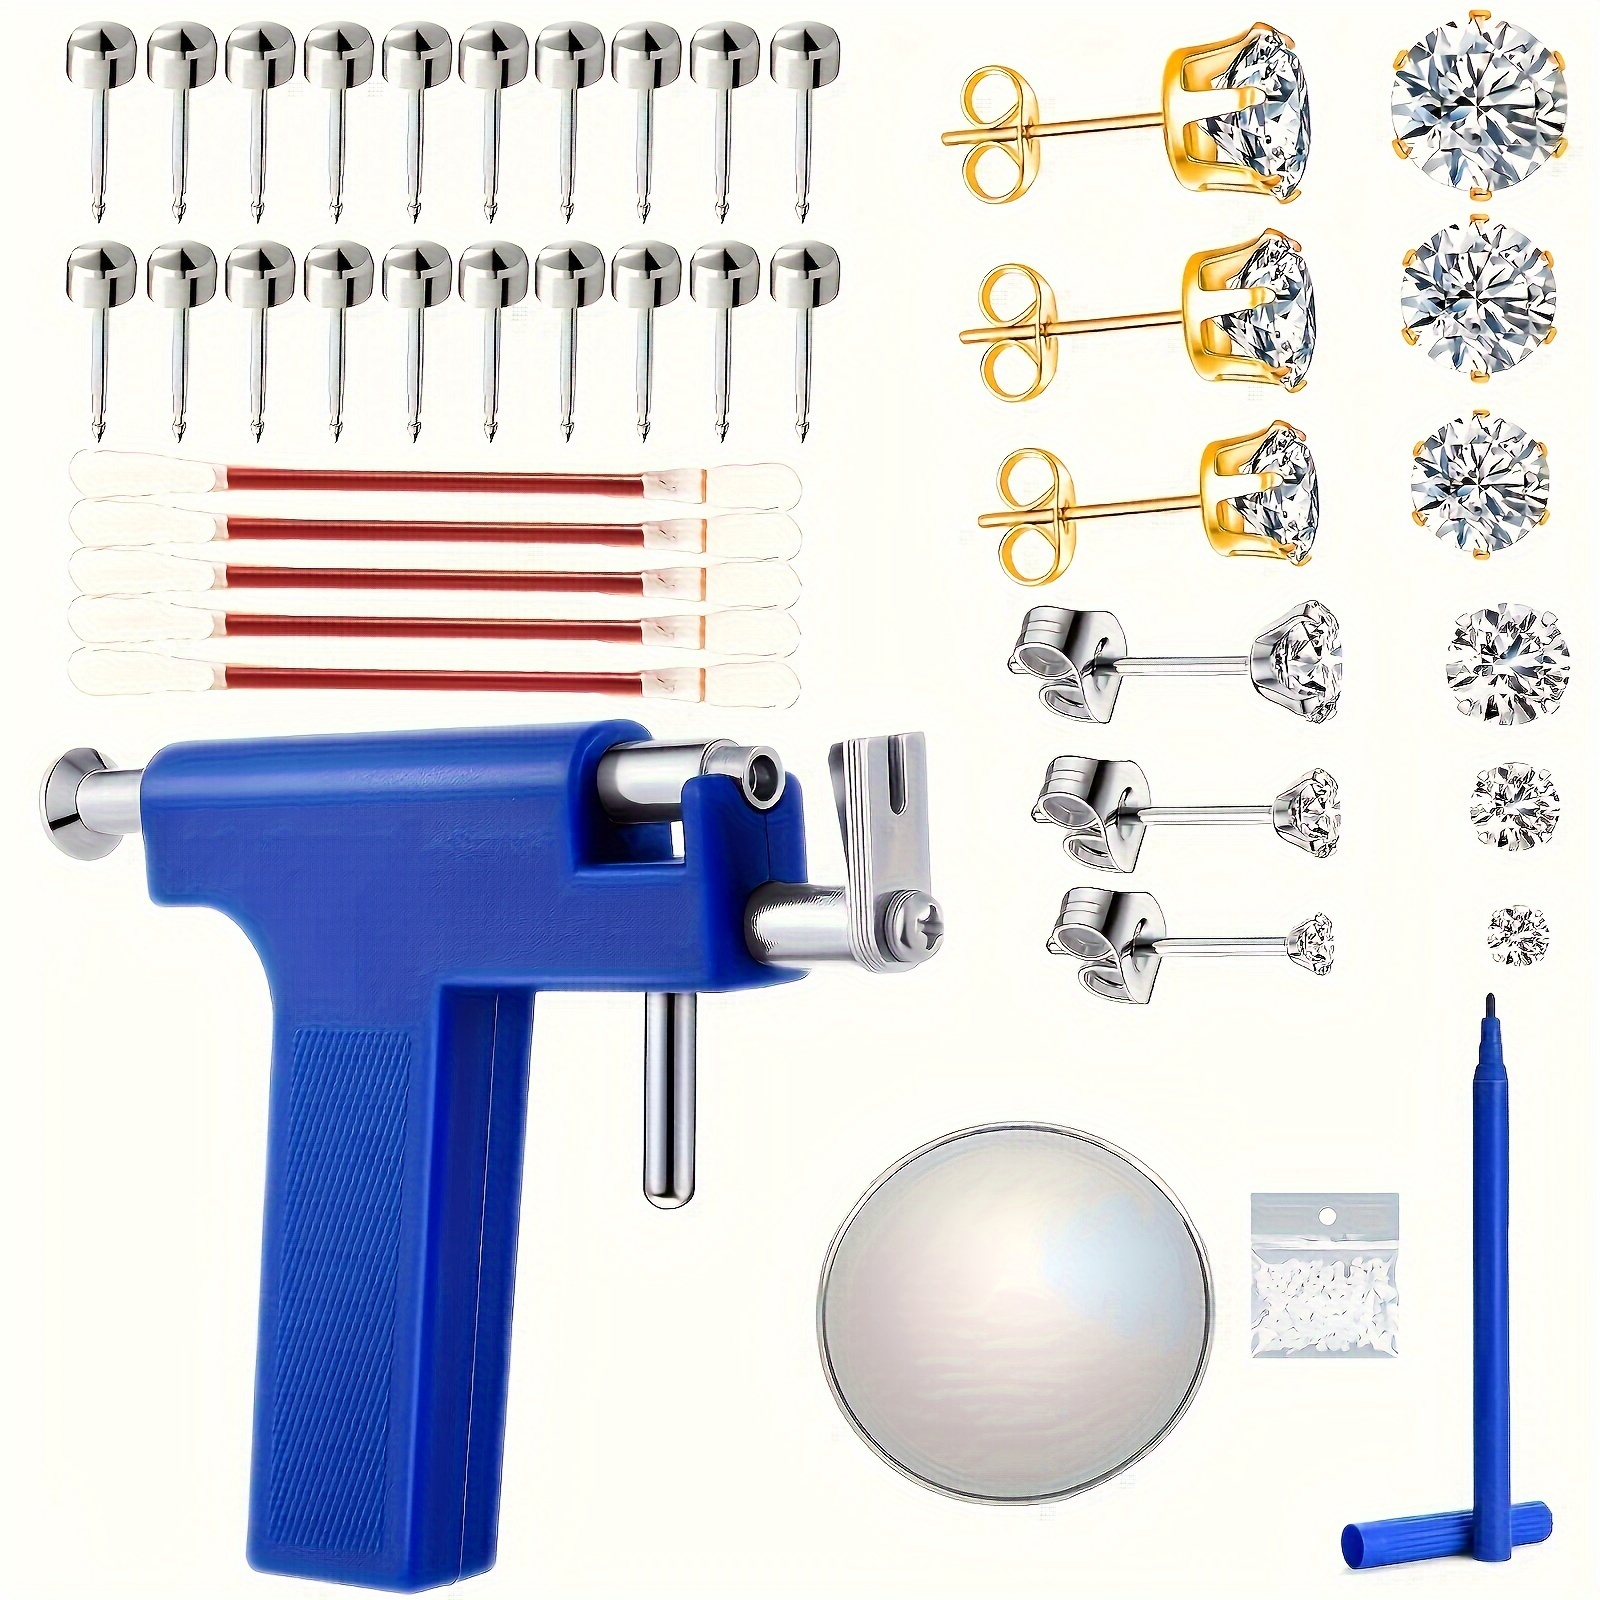 

Reusable Ear Piercing Kit, Salon Piercing Gun Tools With Silver Earrings Set For Home Self Body Nose Lip Ear Piercing Kit With 18 Pairs Stud Earrings